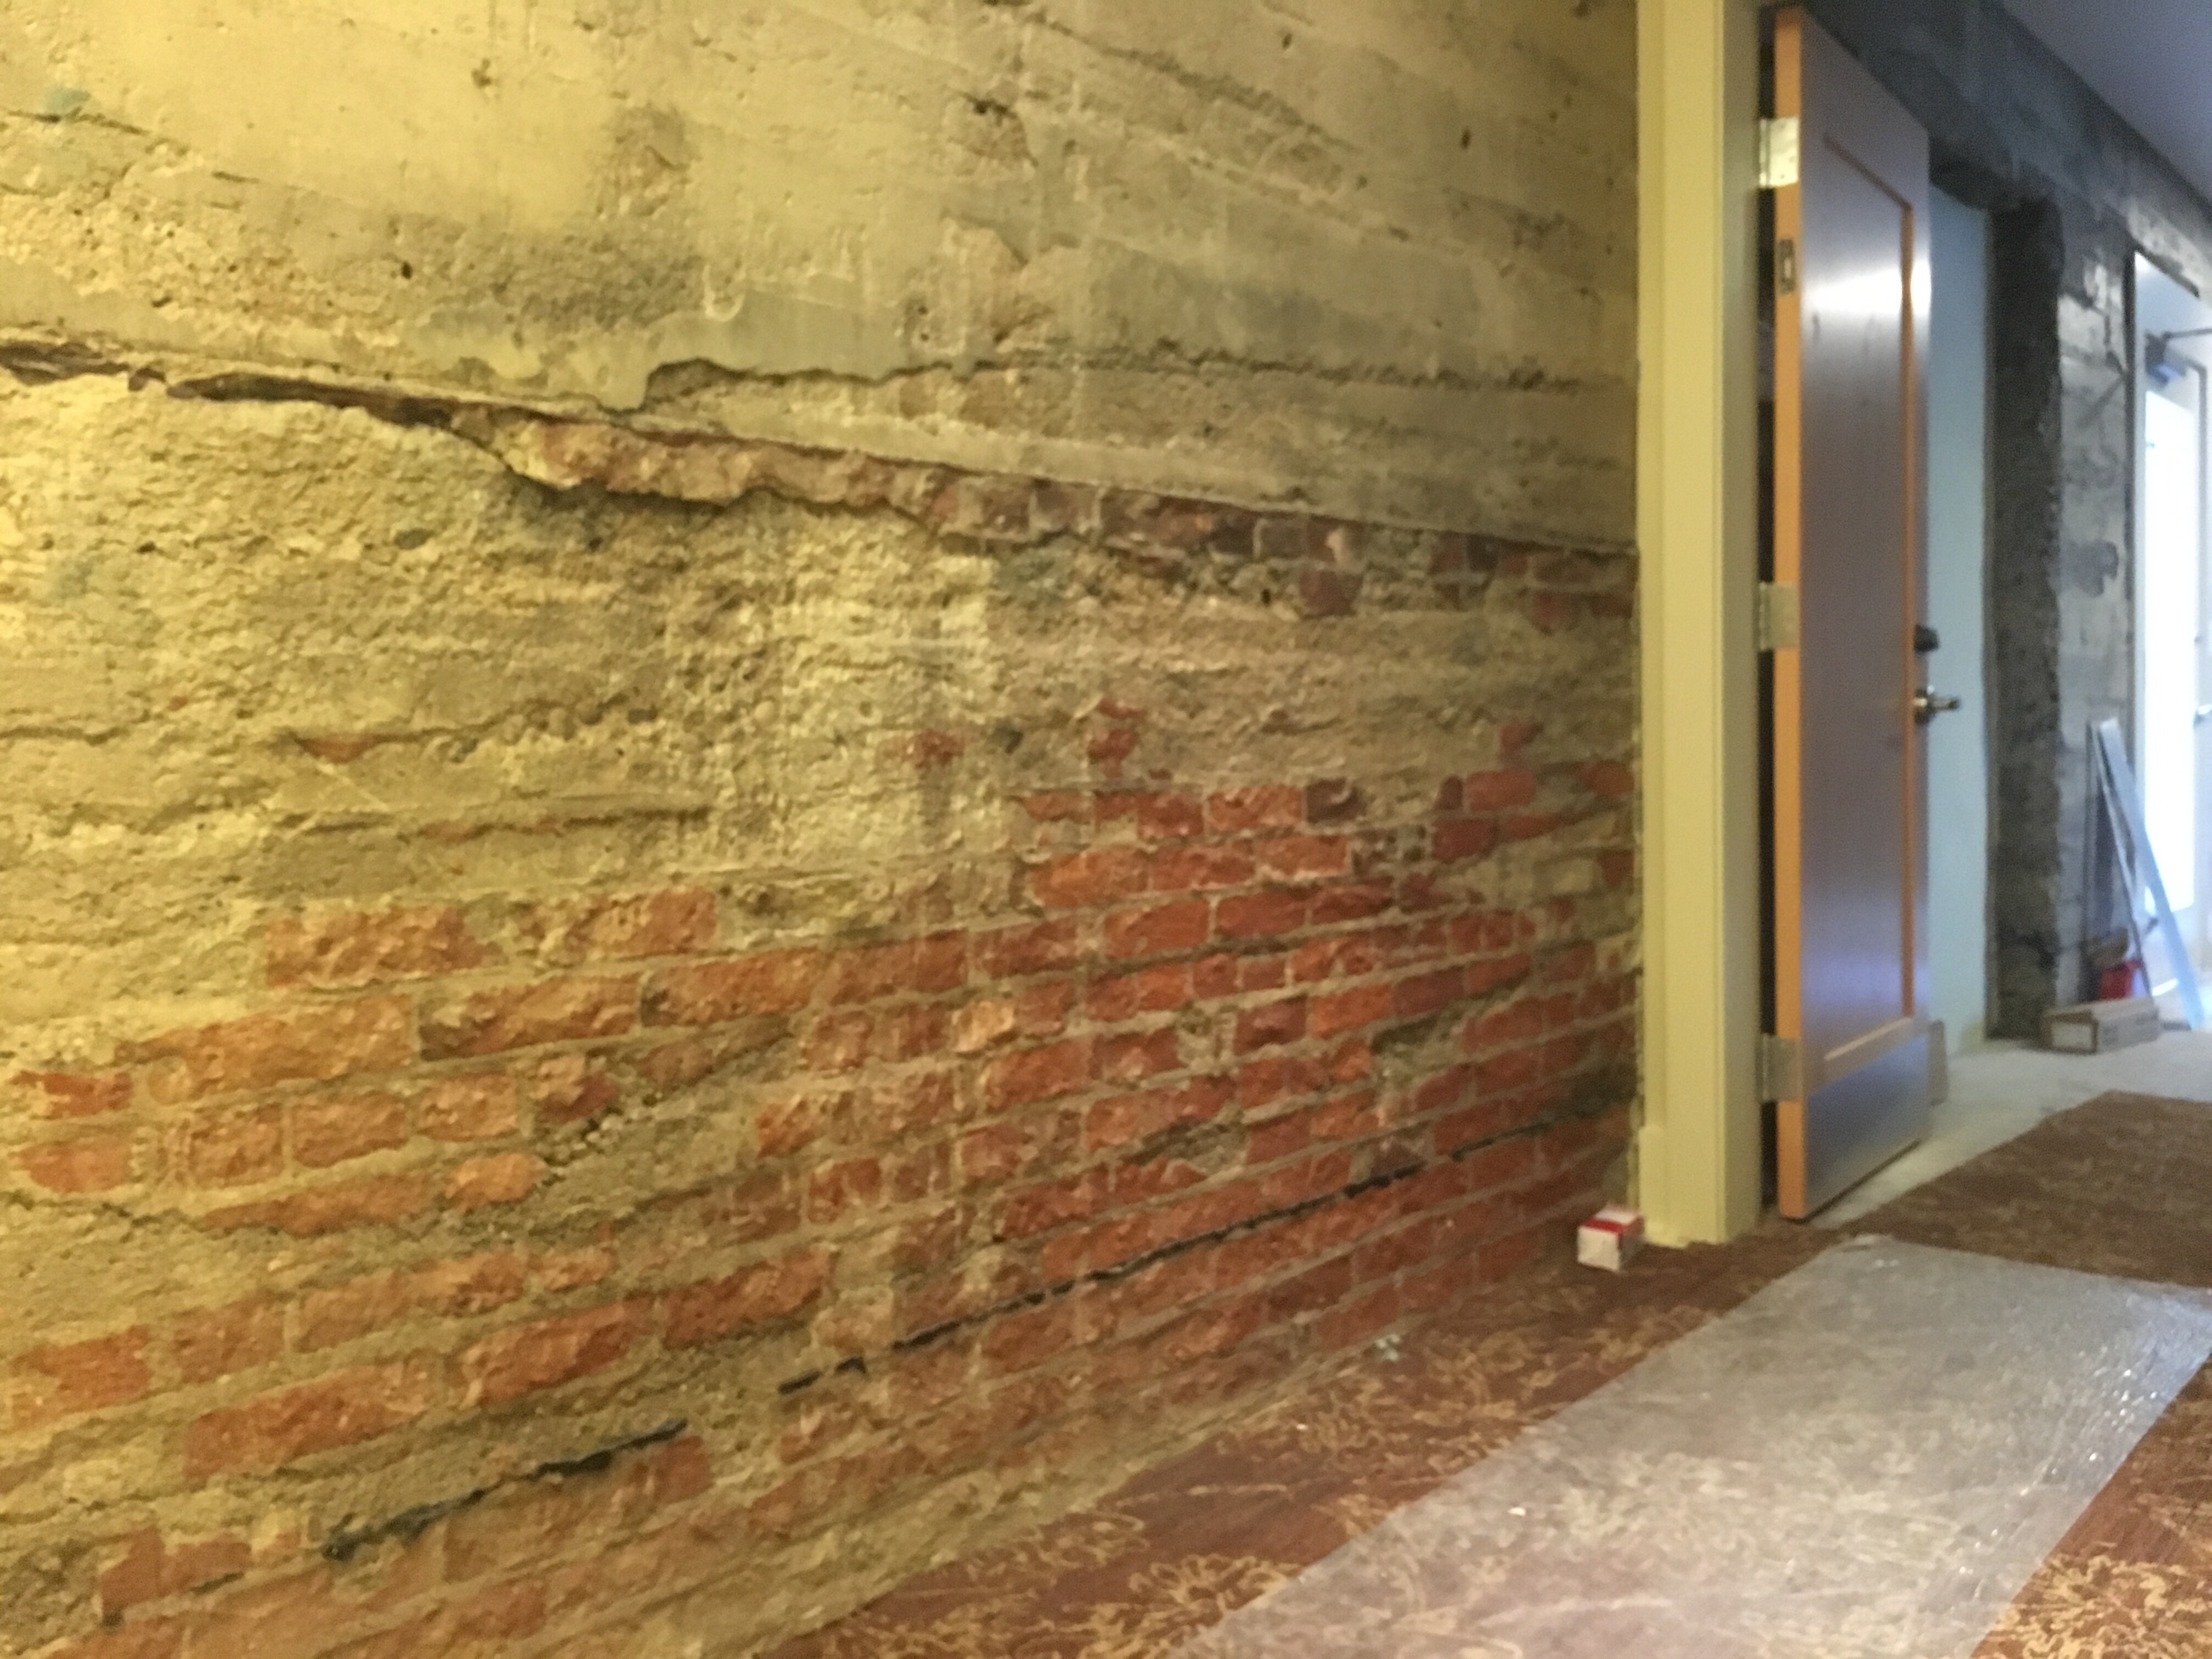 Exposed historical brick wall from the old Lynden Department Store building, in the Inn at Lynden hall between guest rooms.